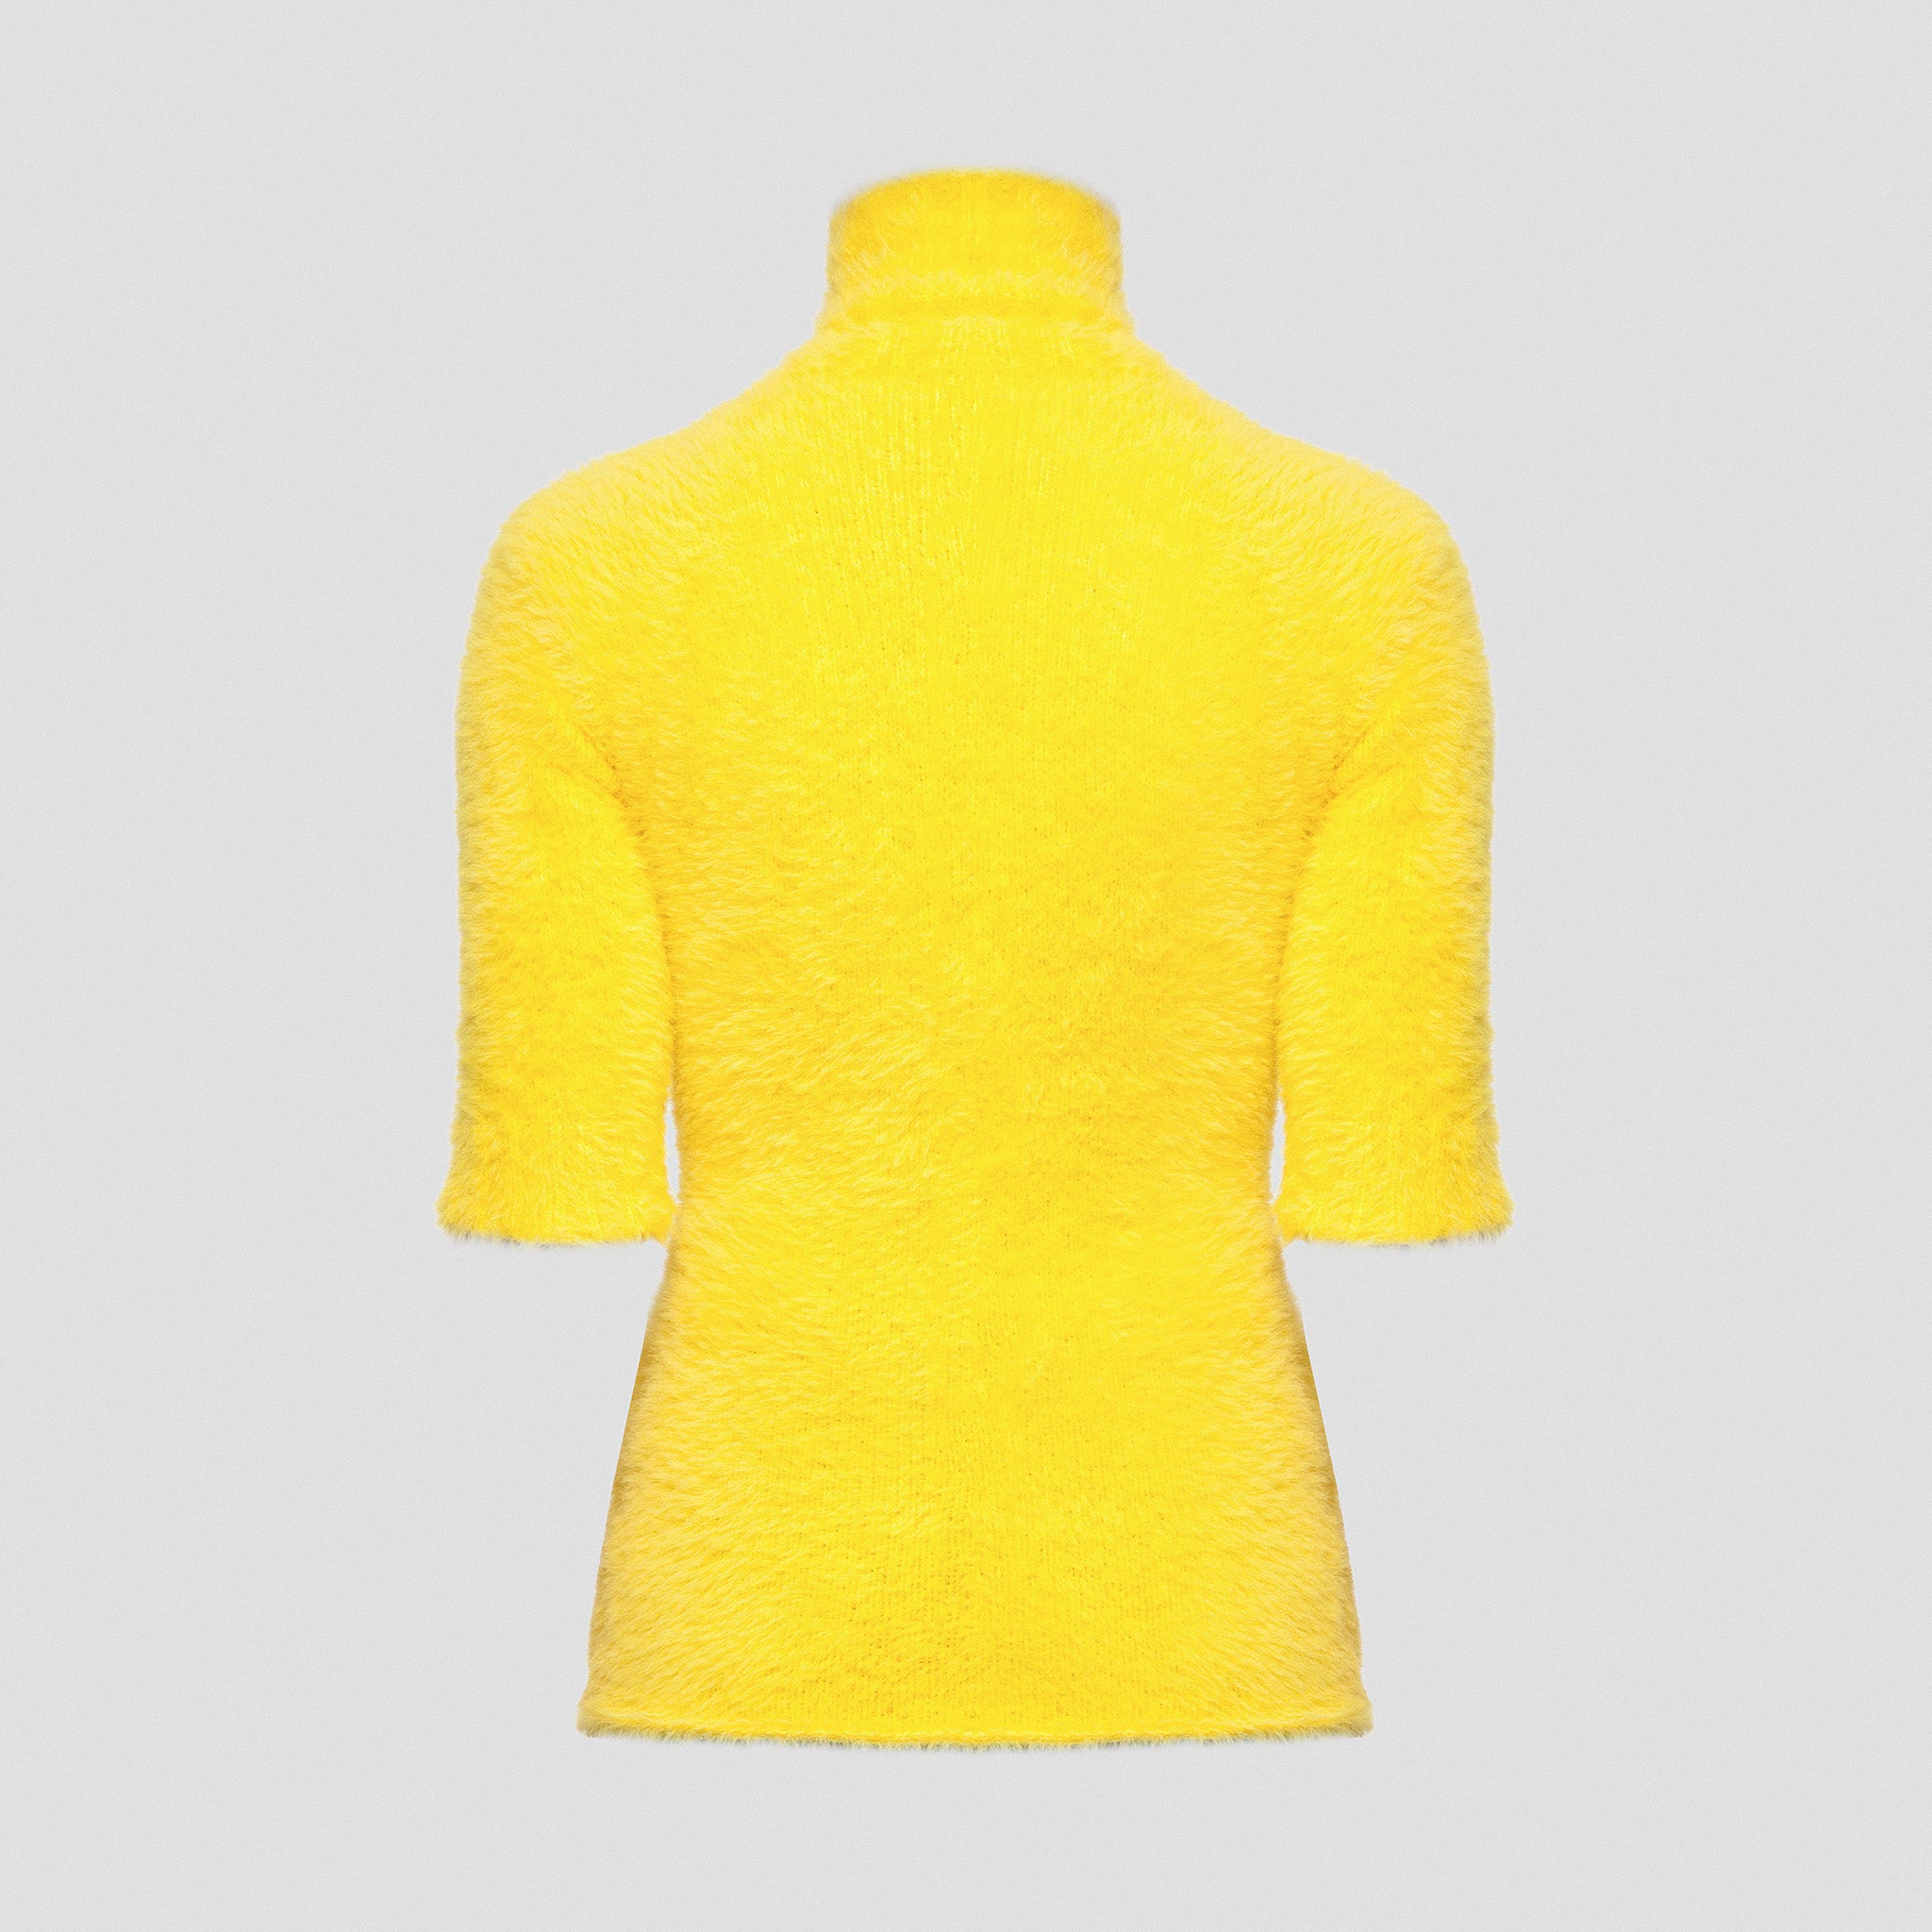 SUNNY YELLOW KNITTED TURTLENECK T-SHIRT